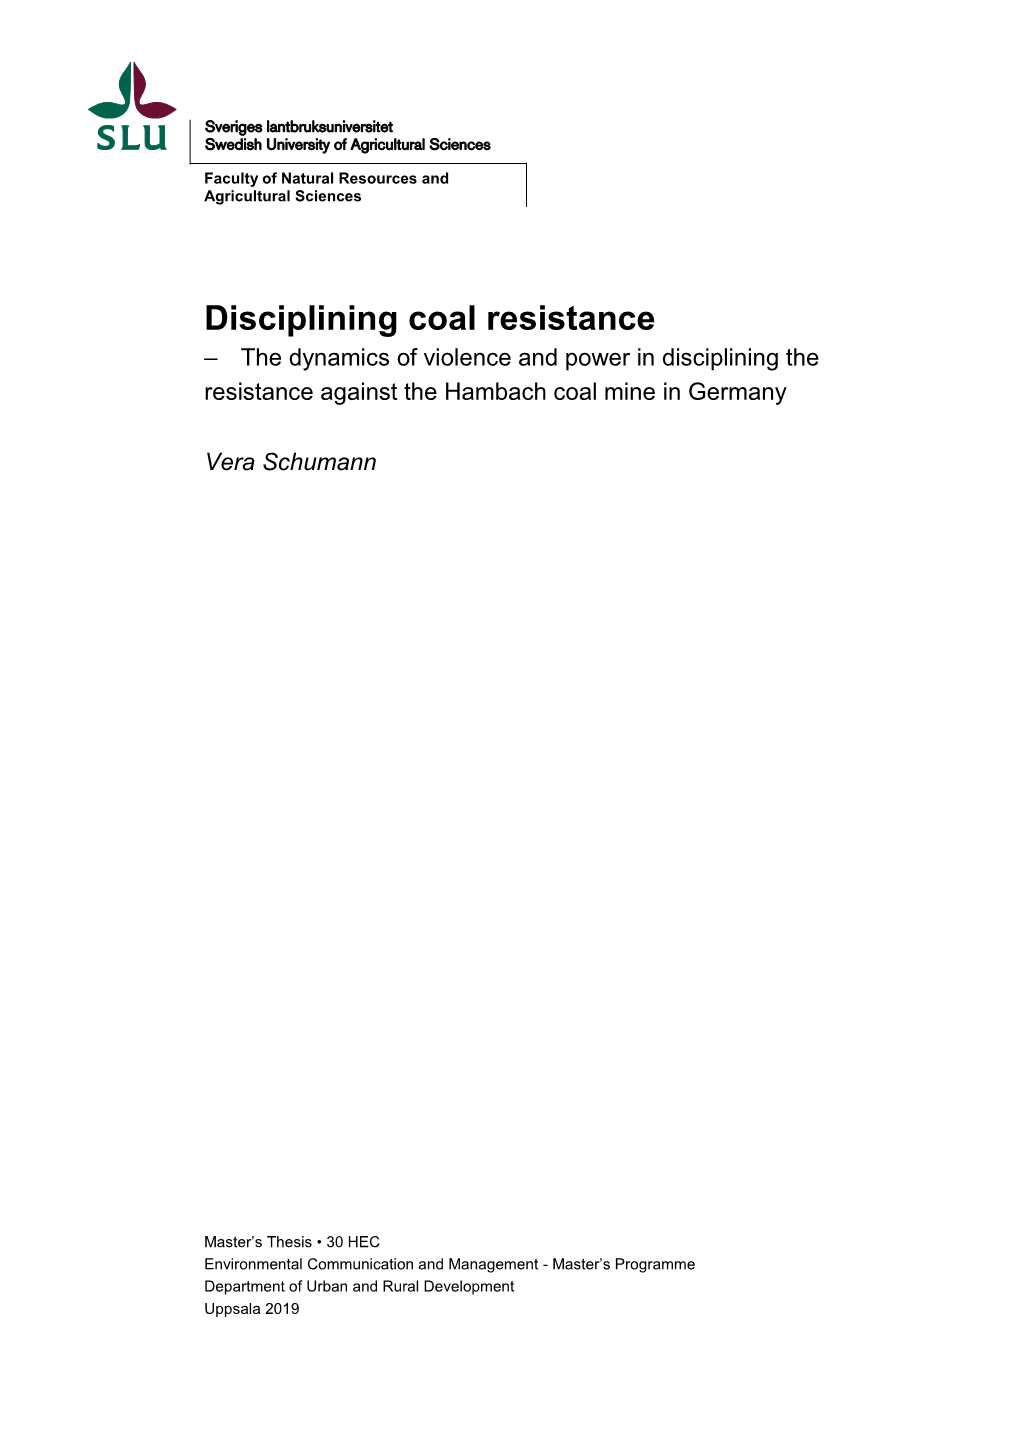 Disciplining Coal Resistance – the Dynamics of Violence and Power in Disciplining the Resistance Against the Hambach Coal Mine in Germany